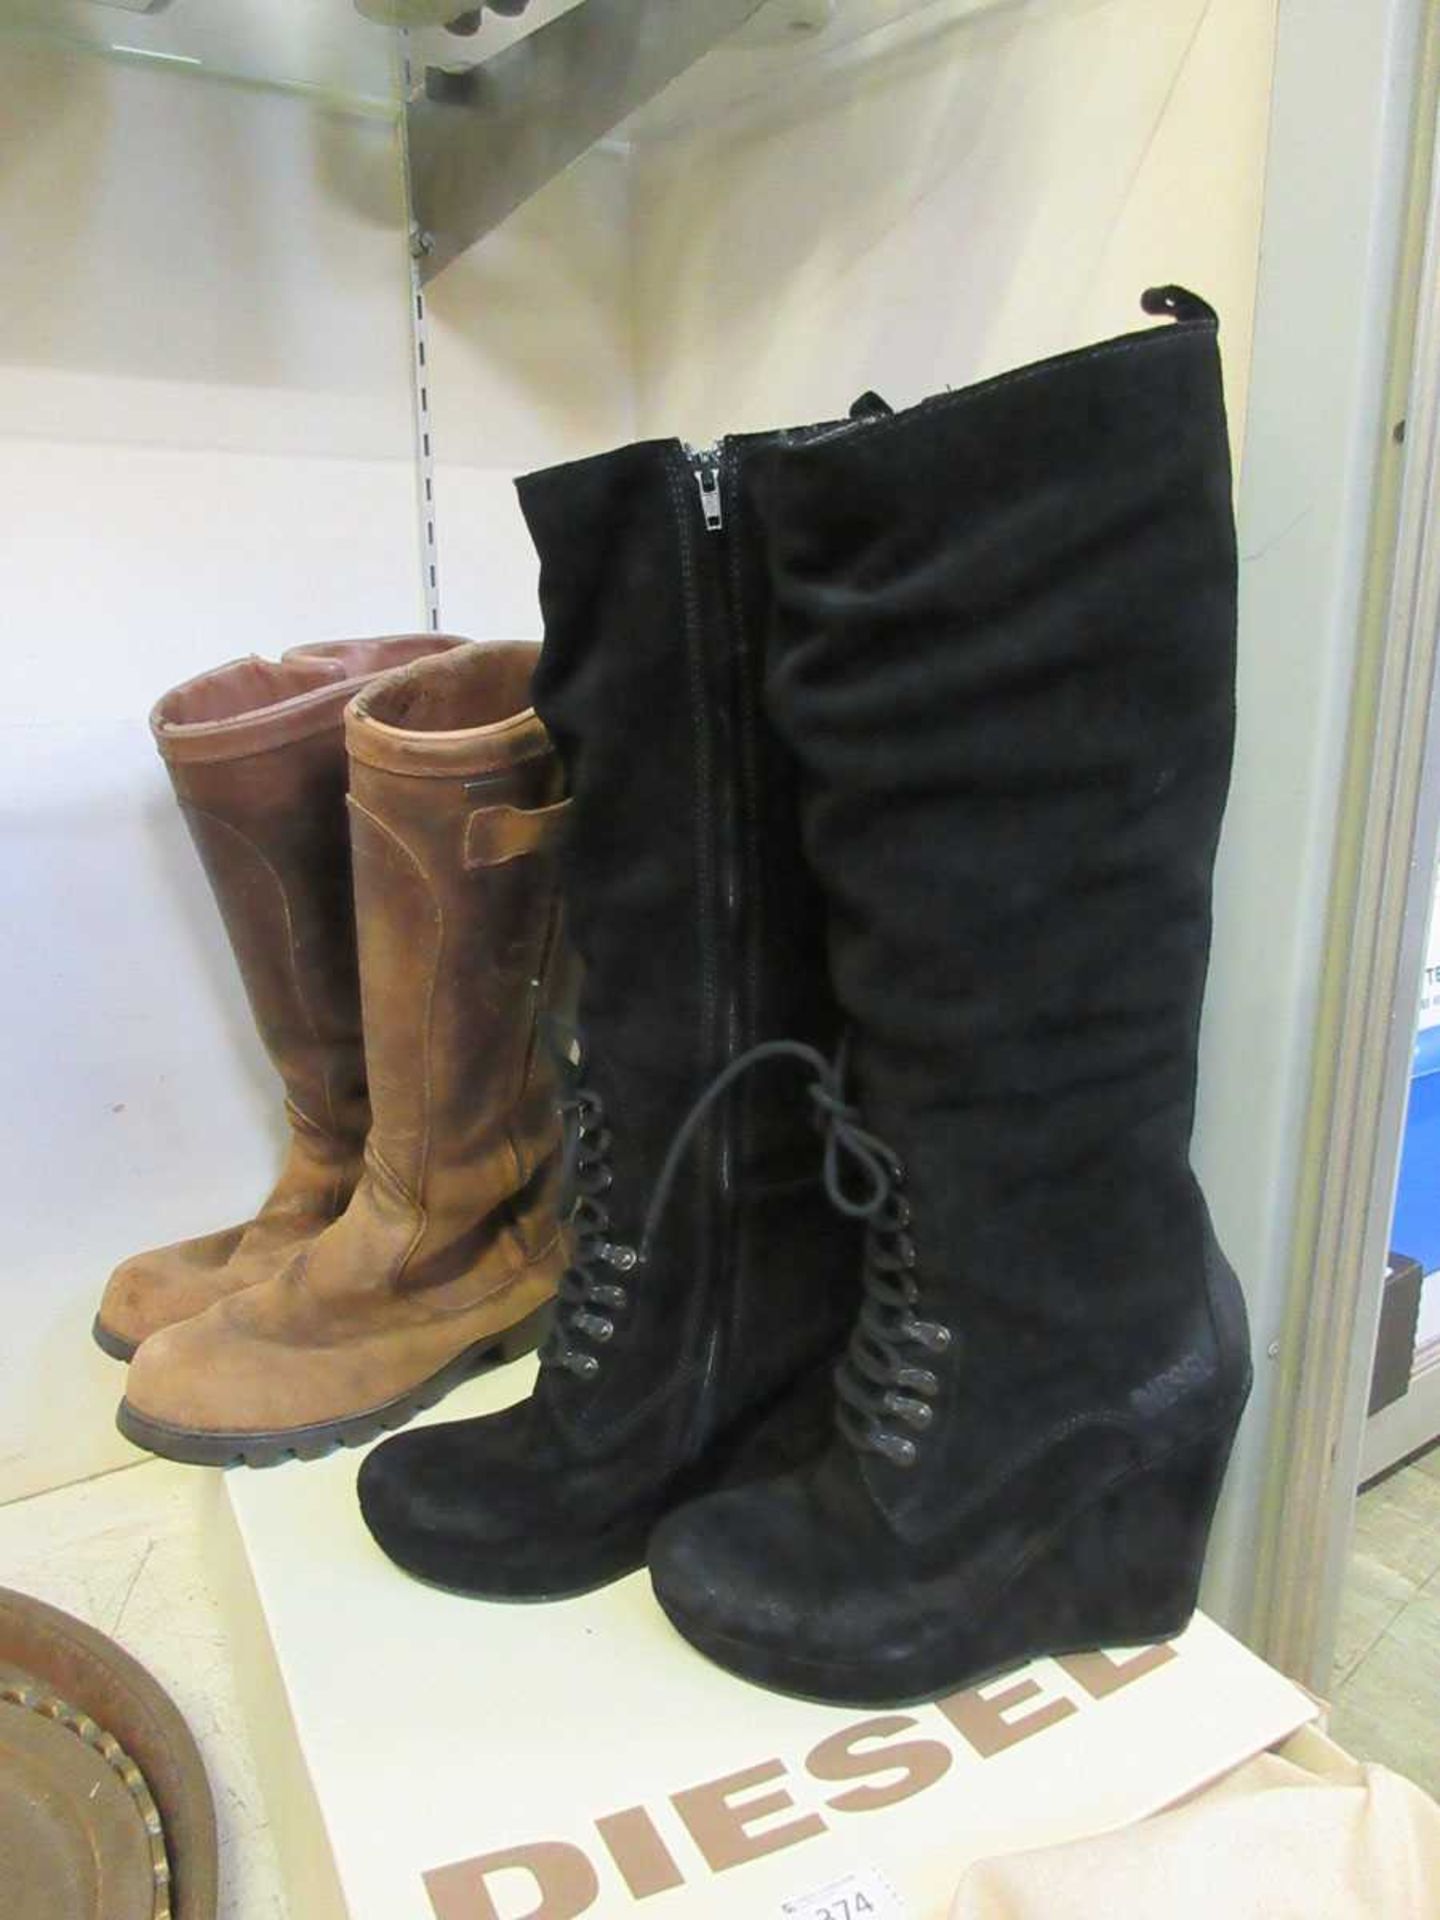 A pair of size 6 brown leather worn Musto boots, together with a pair of Diesel boots in box